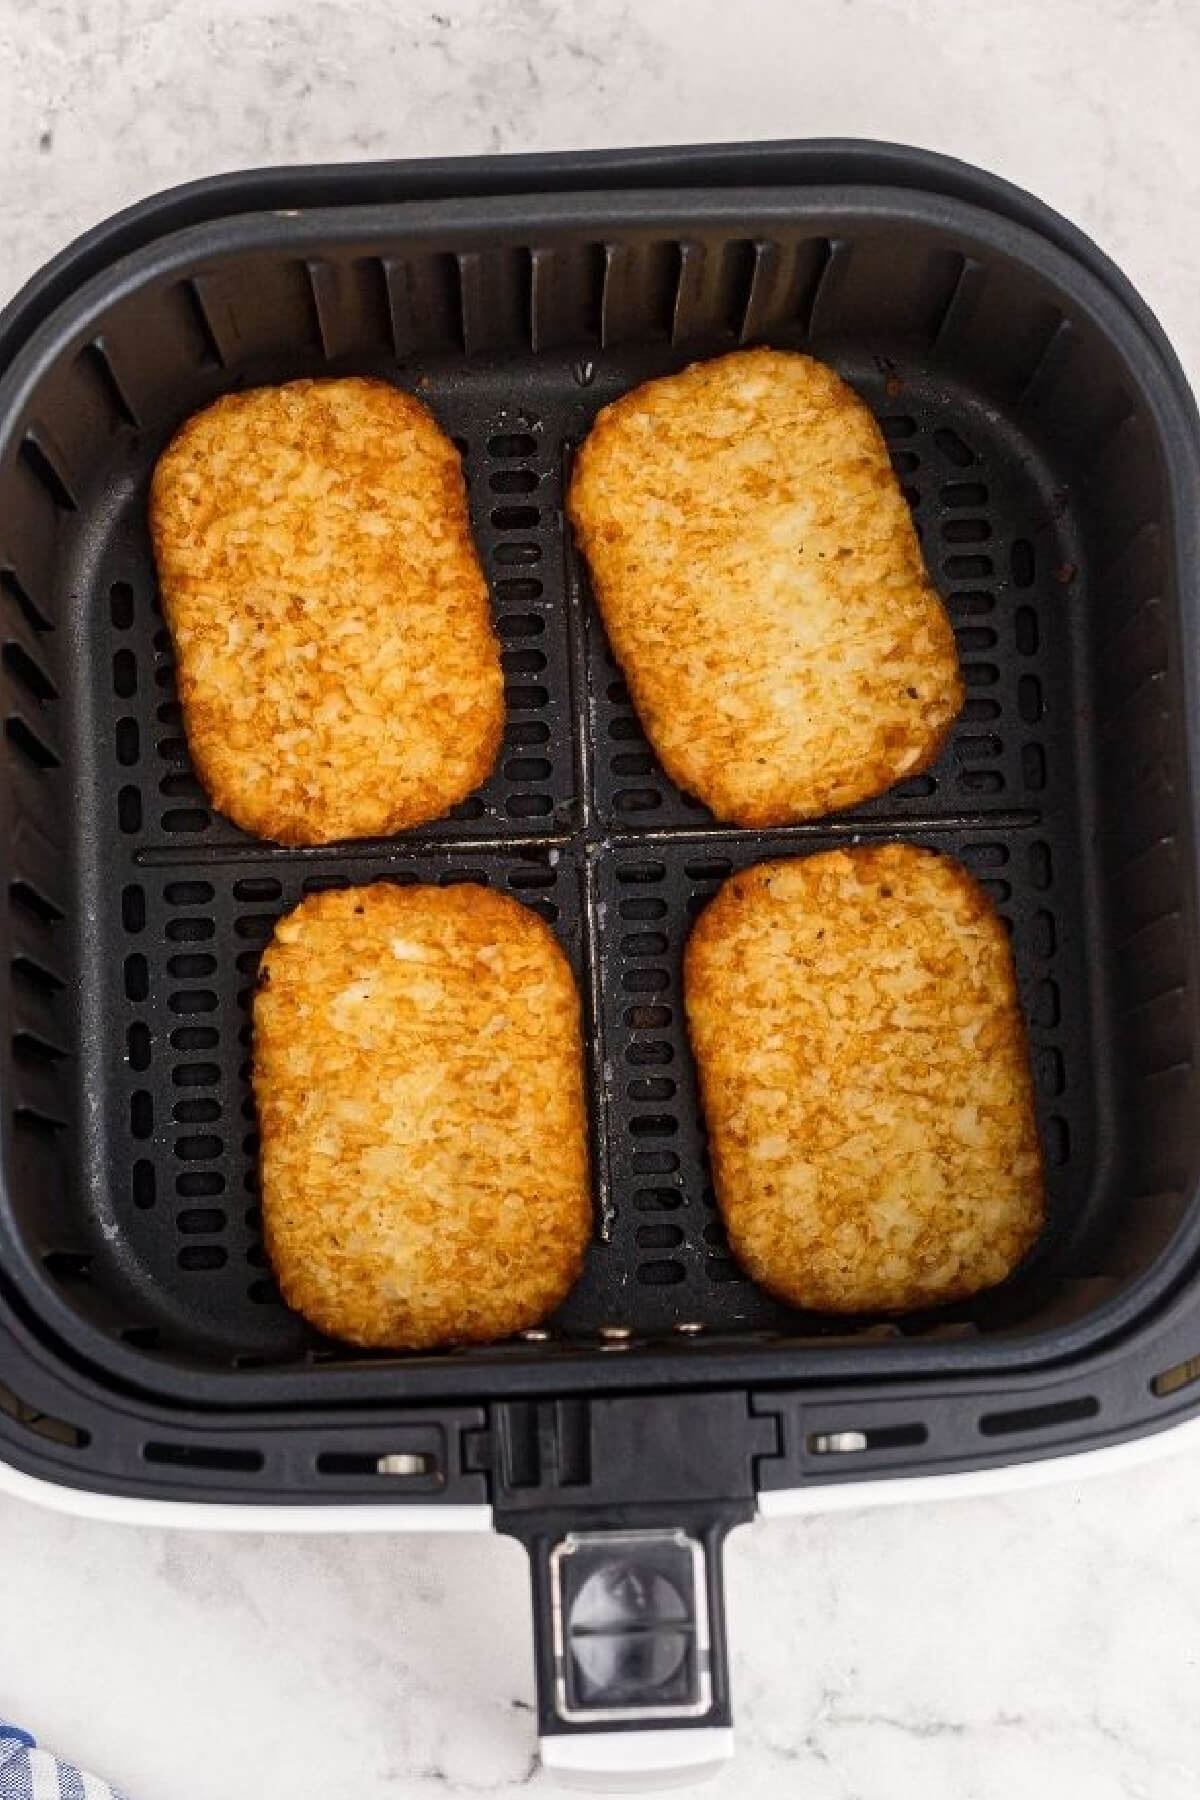 Air fried hash brown patties in the basket, ready to remove and serve.